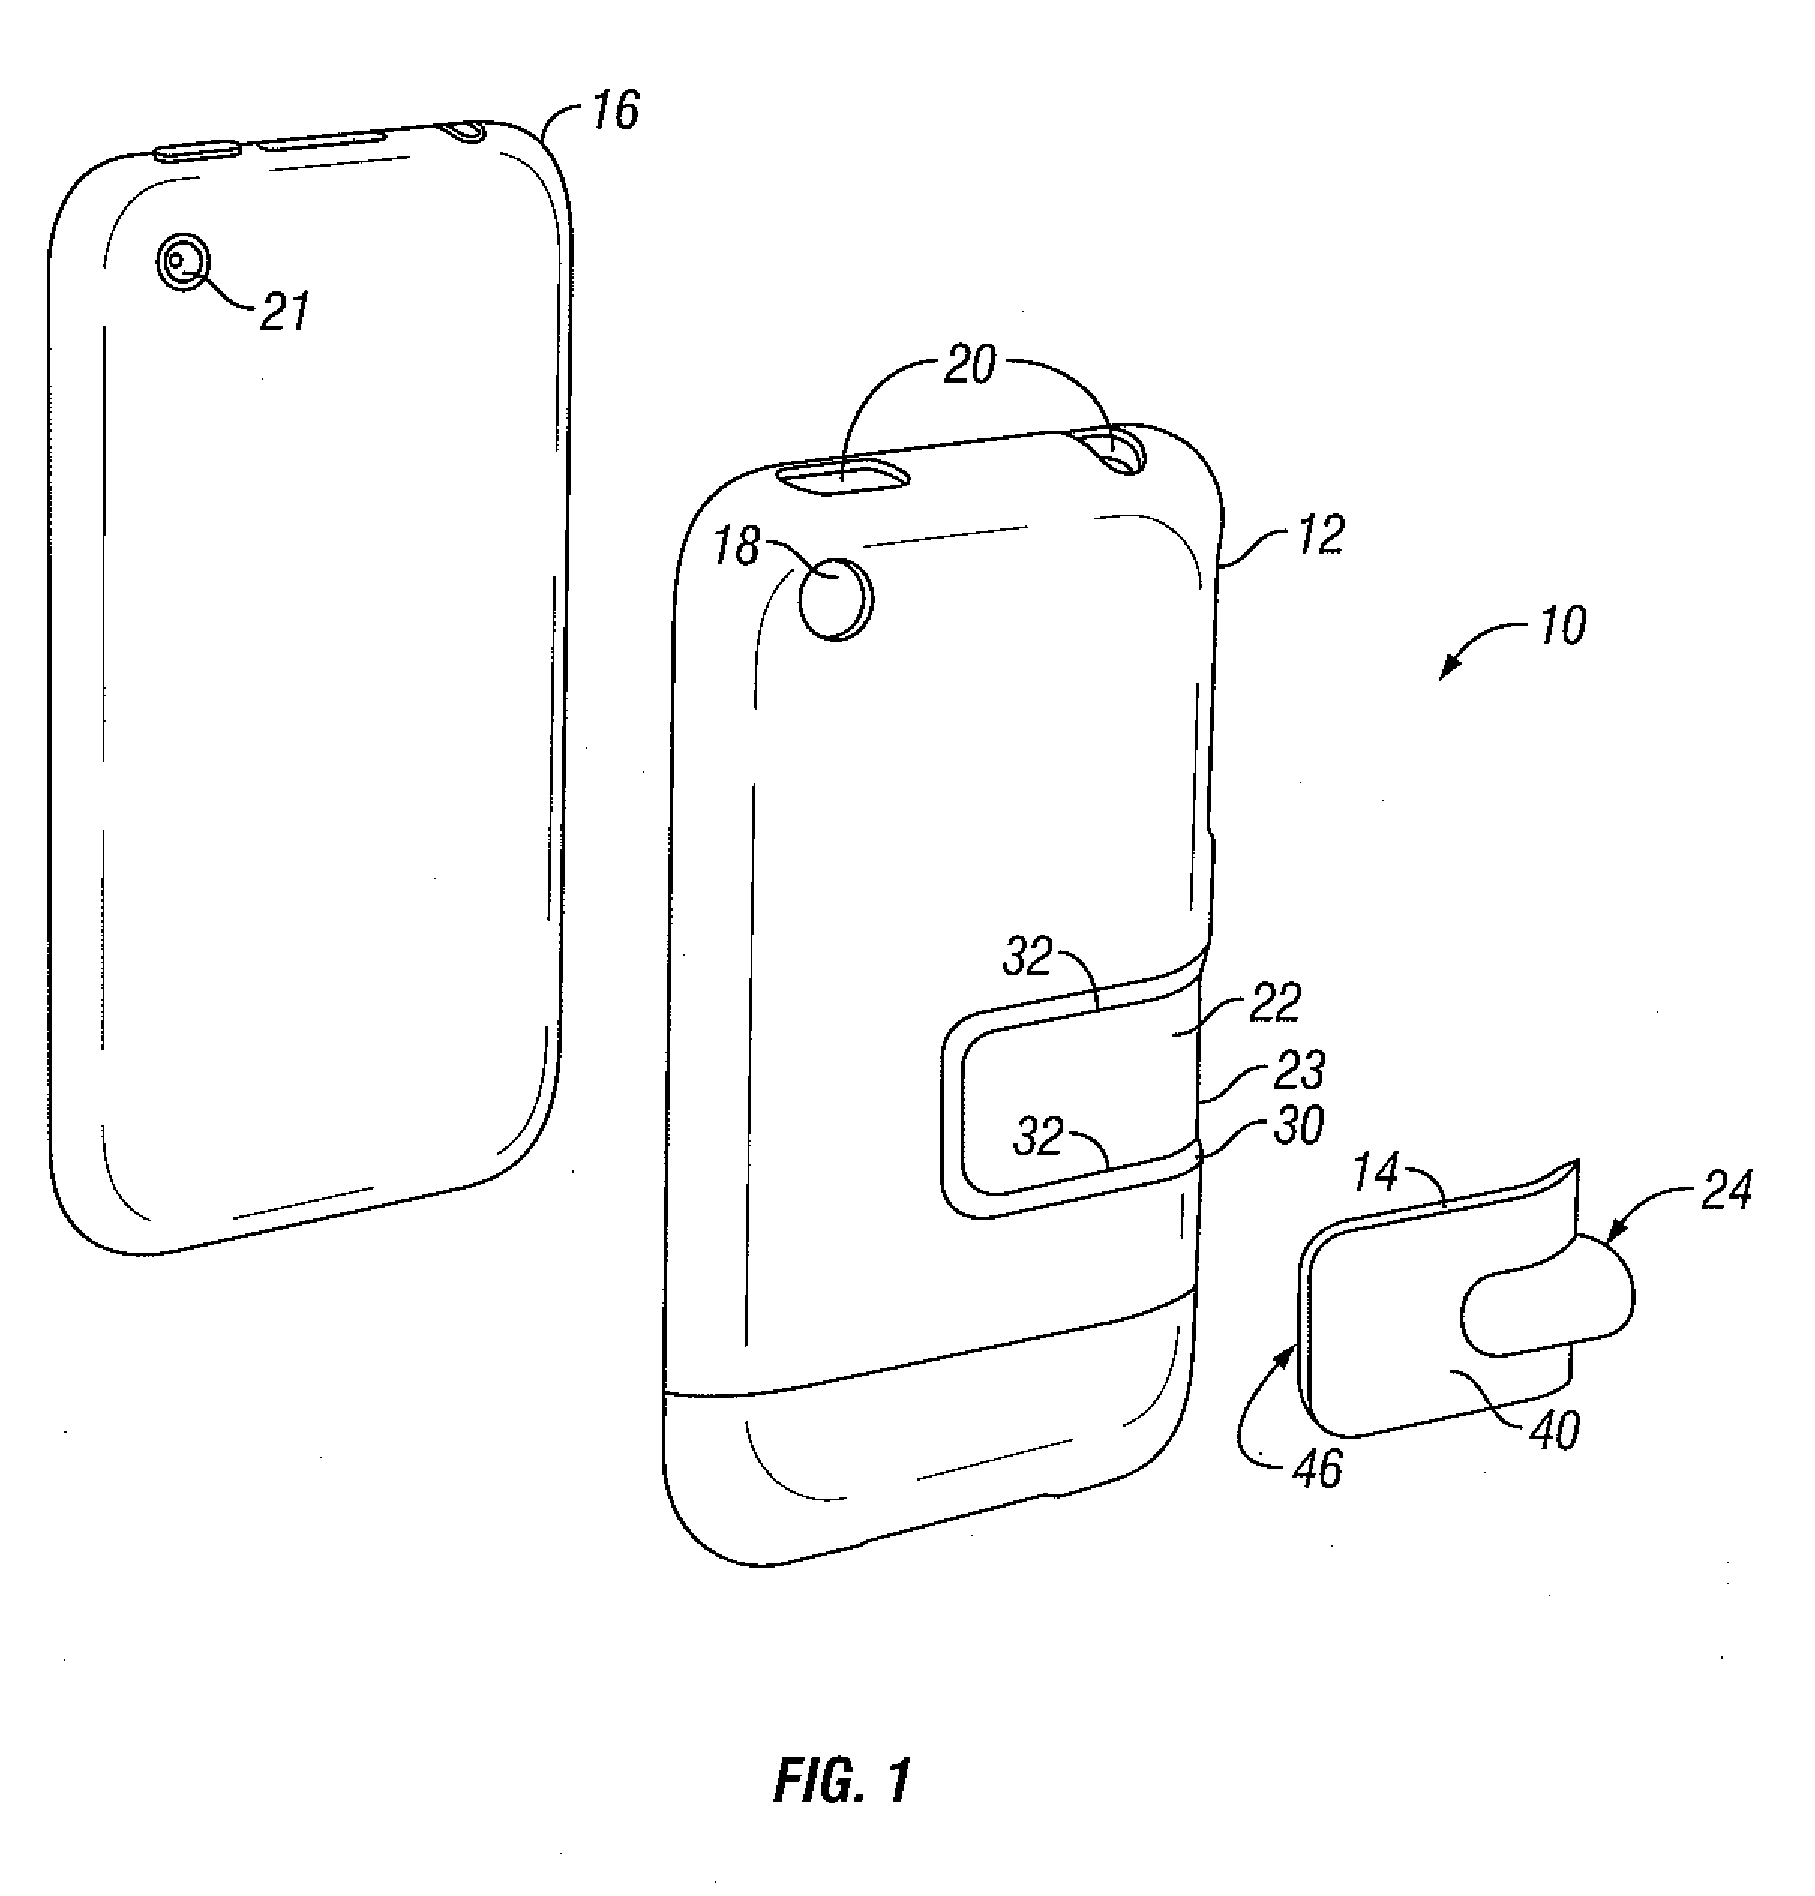 Coupling and accessory system for electronic devices